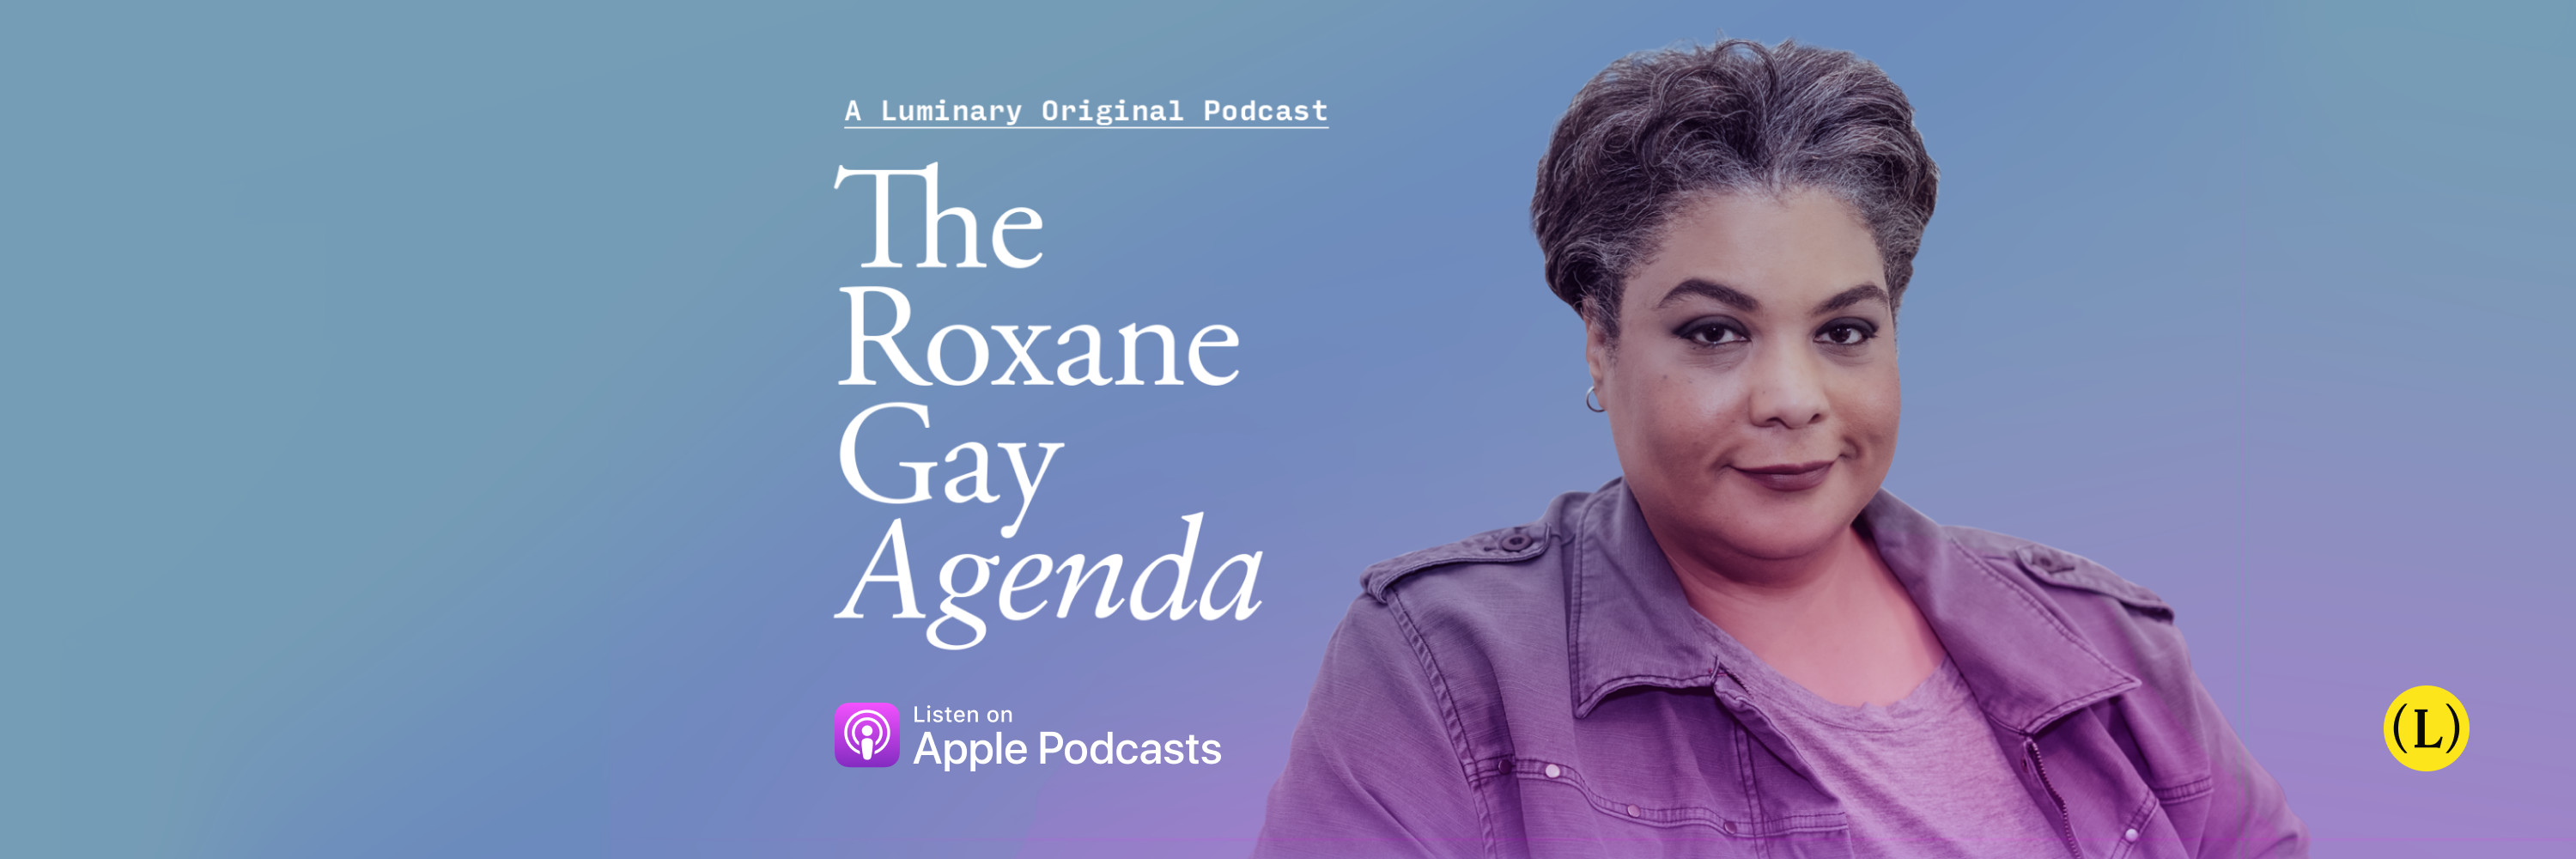 roxane gay twitter i am not one of your little friend